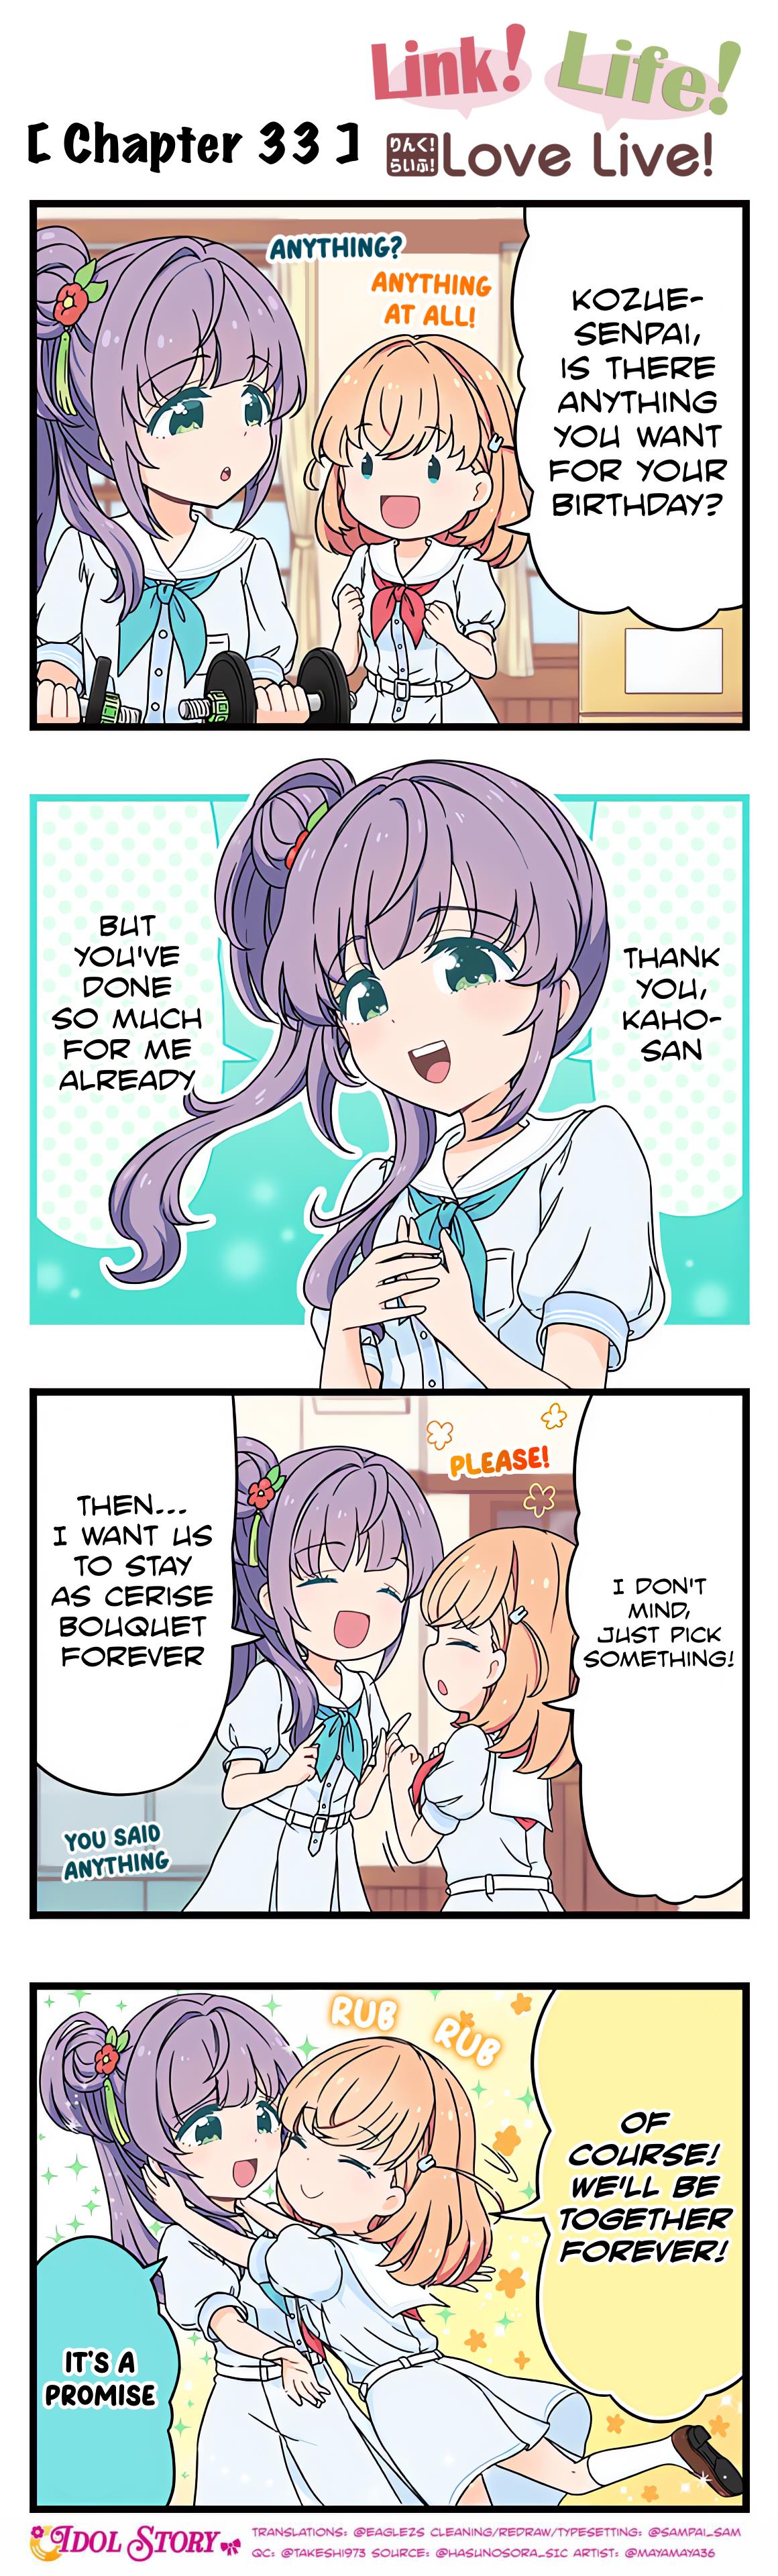 Link! Life! Love Live! Chapter 33 #1